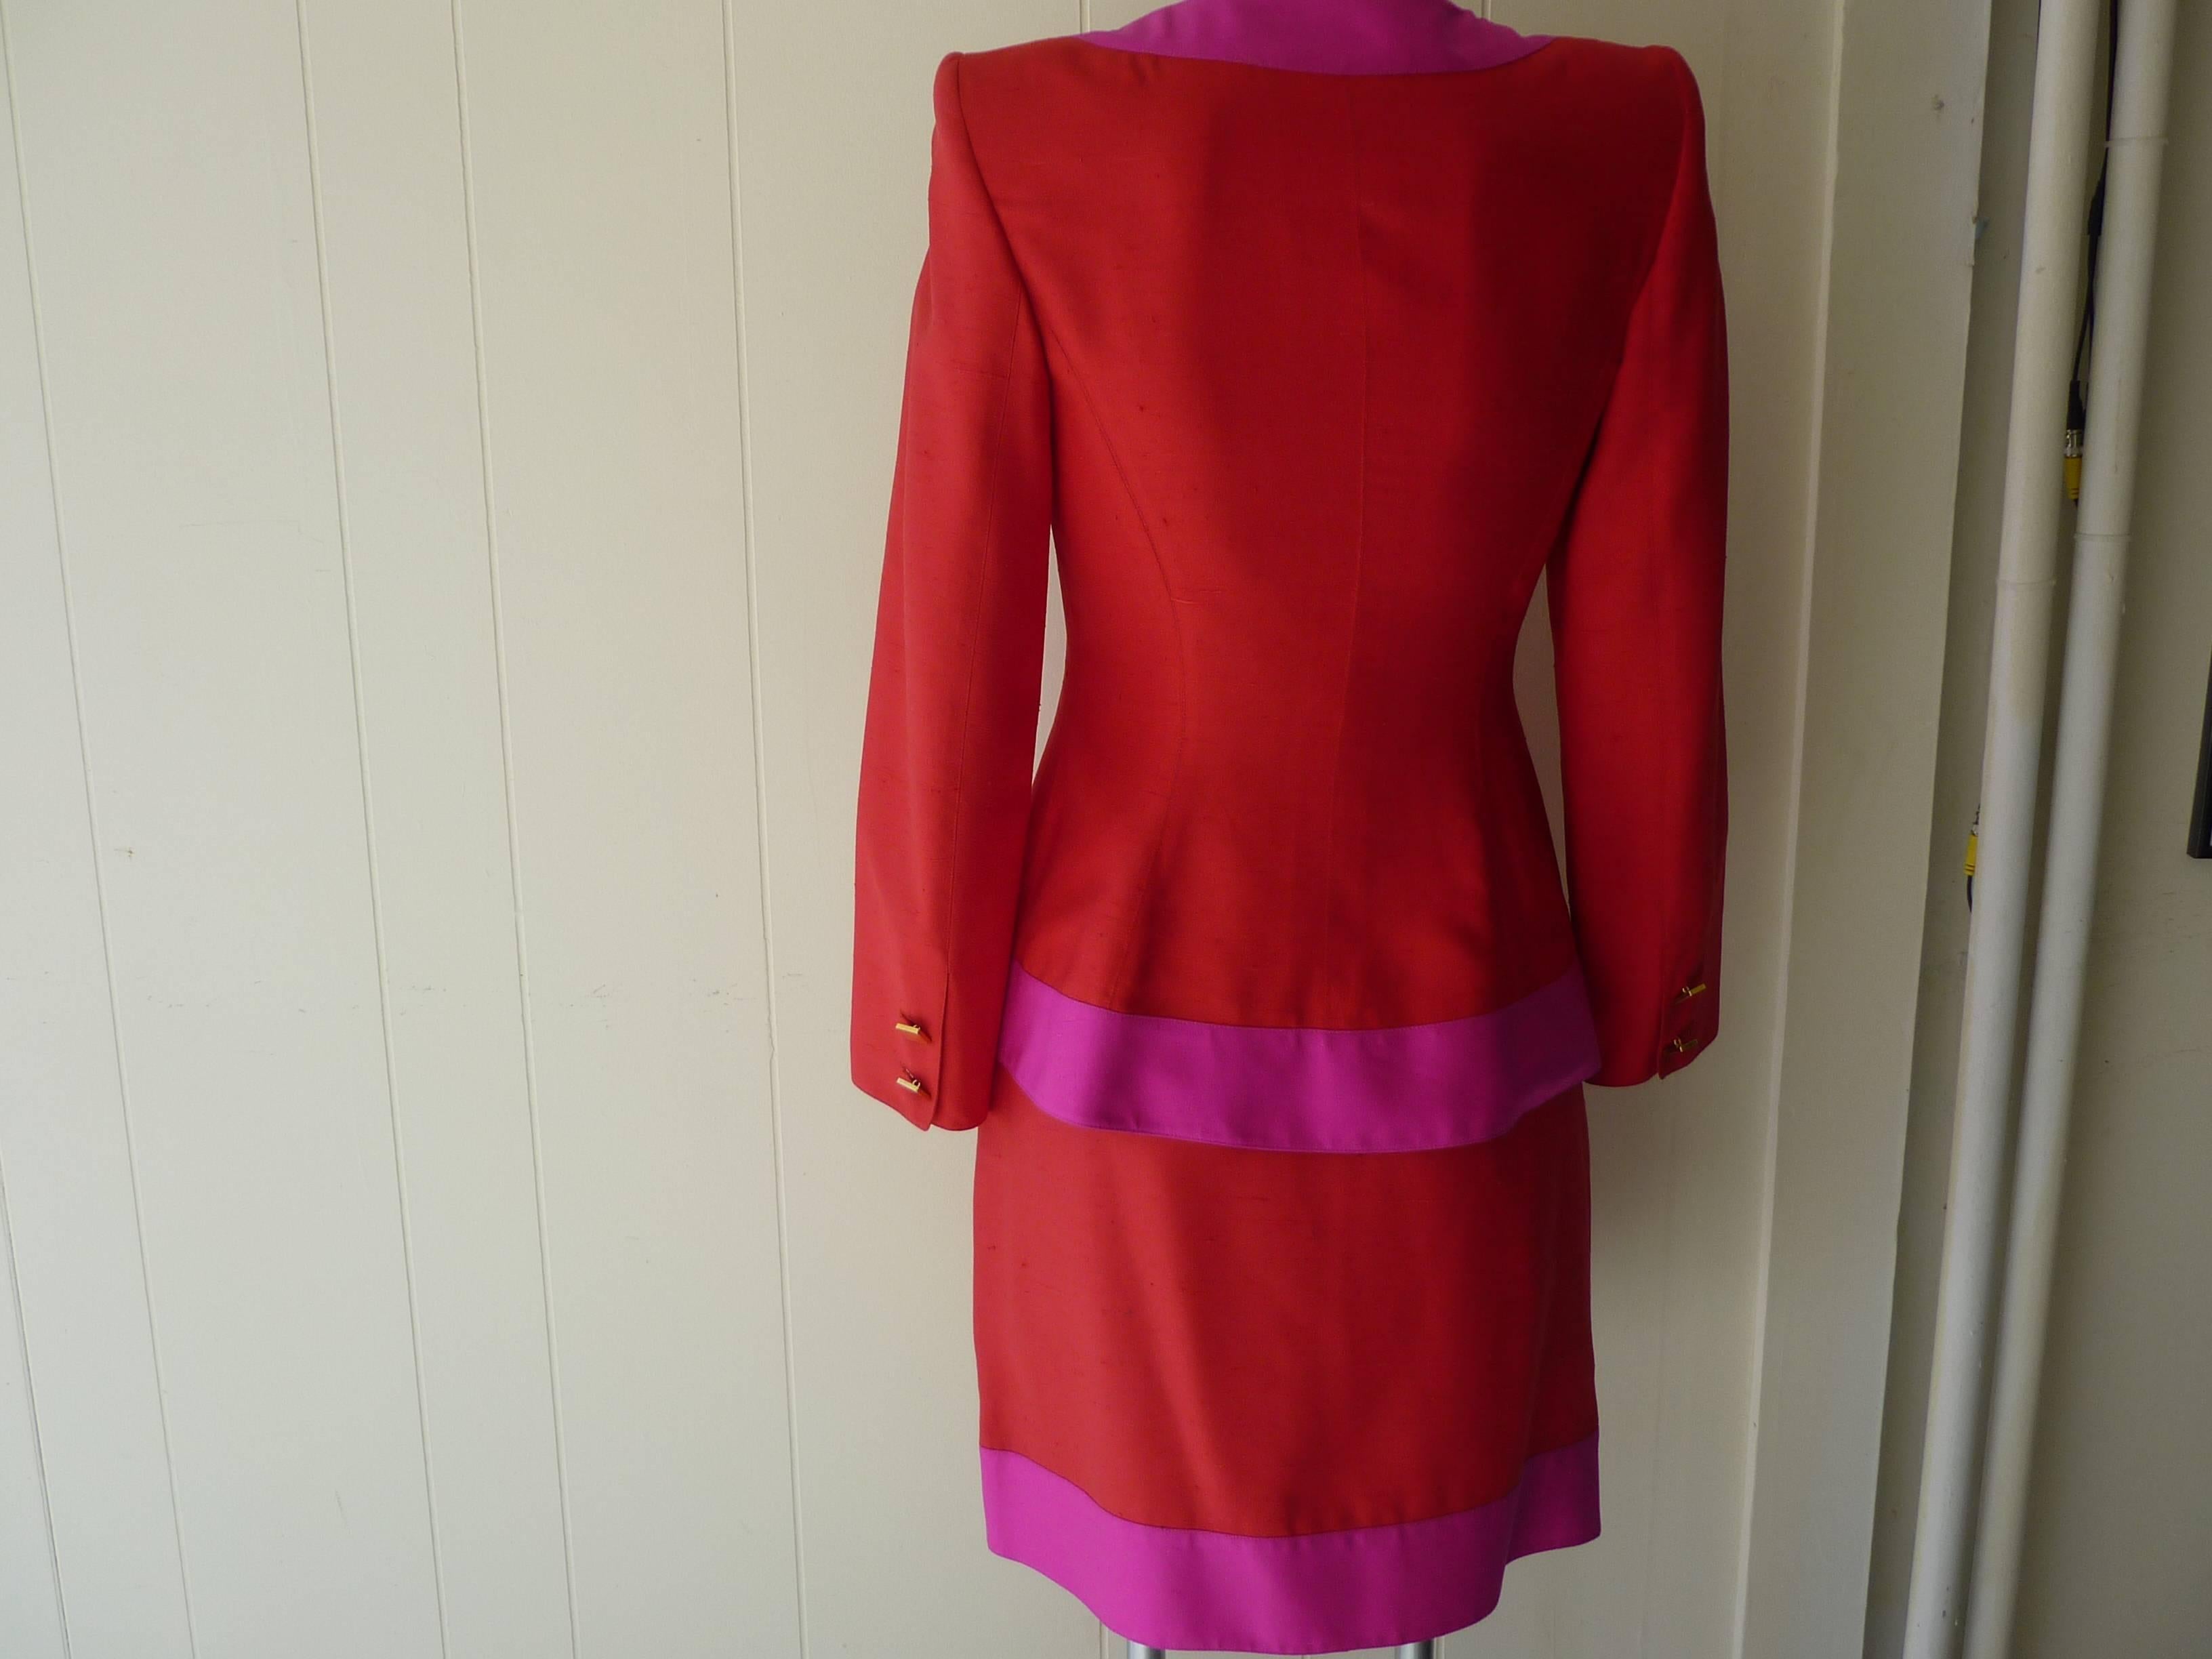 Such an elegant suit in red and fuschia, with gold square buttons on front and at cuffs. This suit has padded shoulders; a square neckline, and fitted peplum-like waist.
Measurements:
skirt lenght and waist: 19